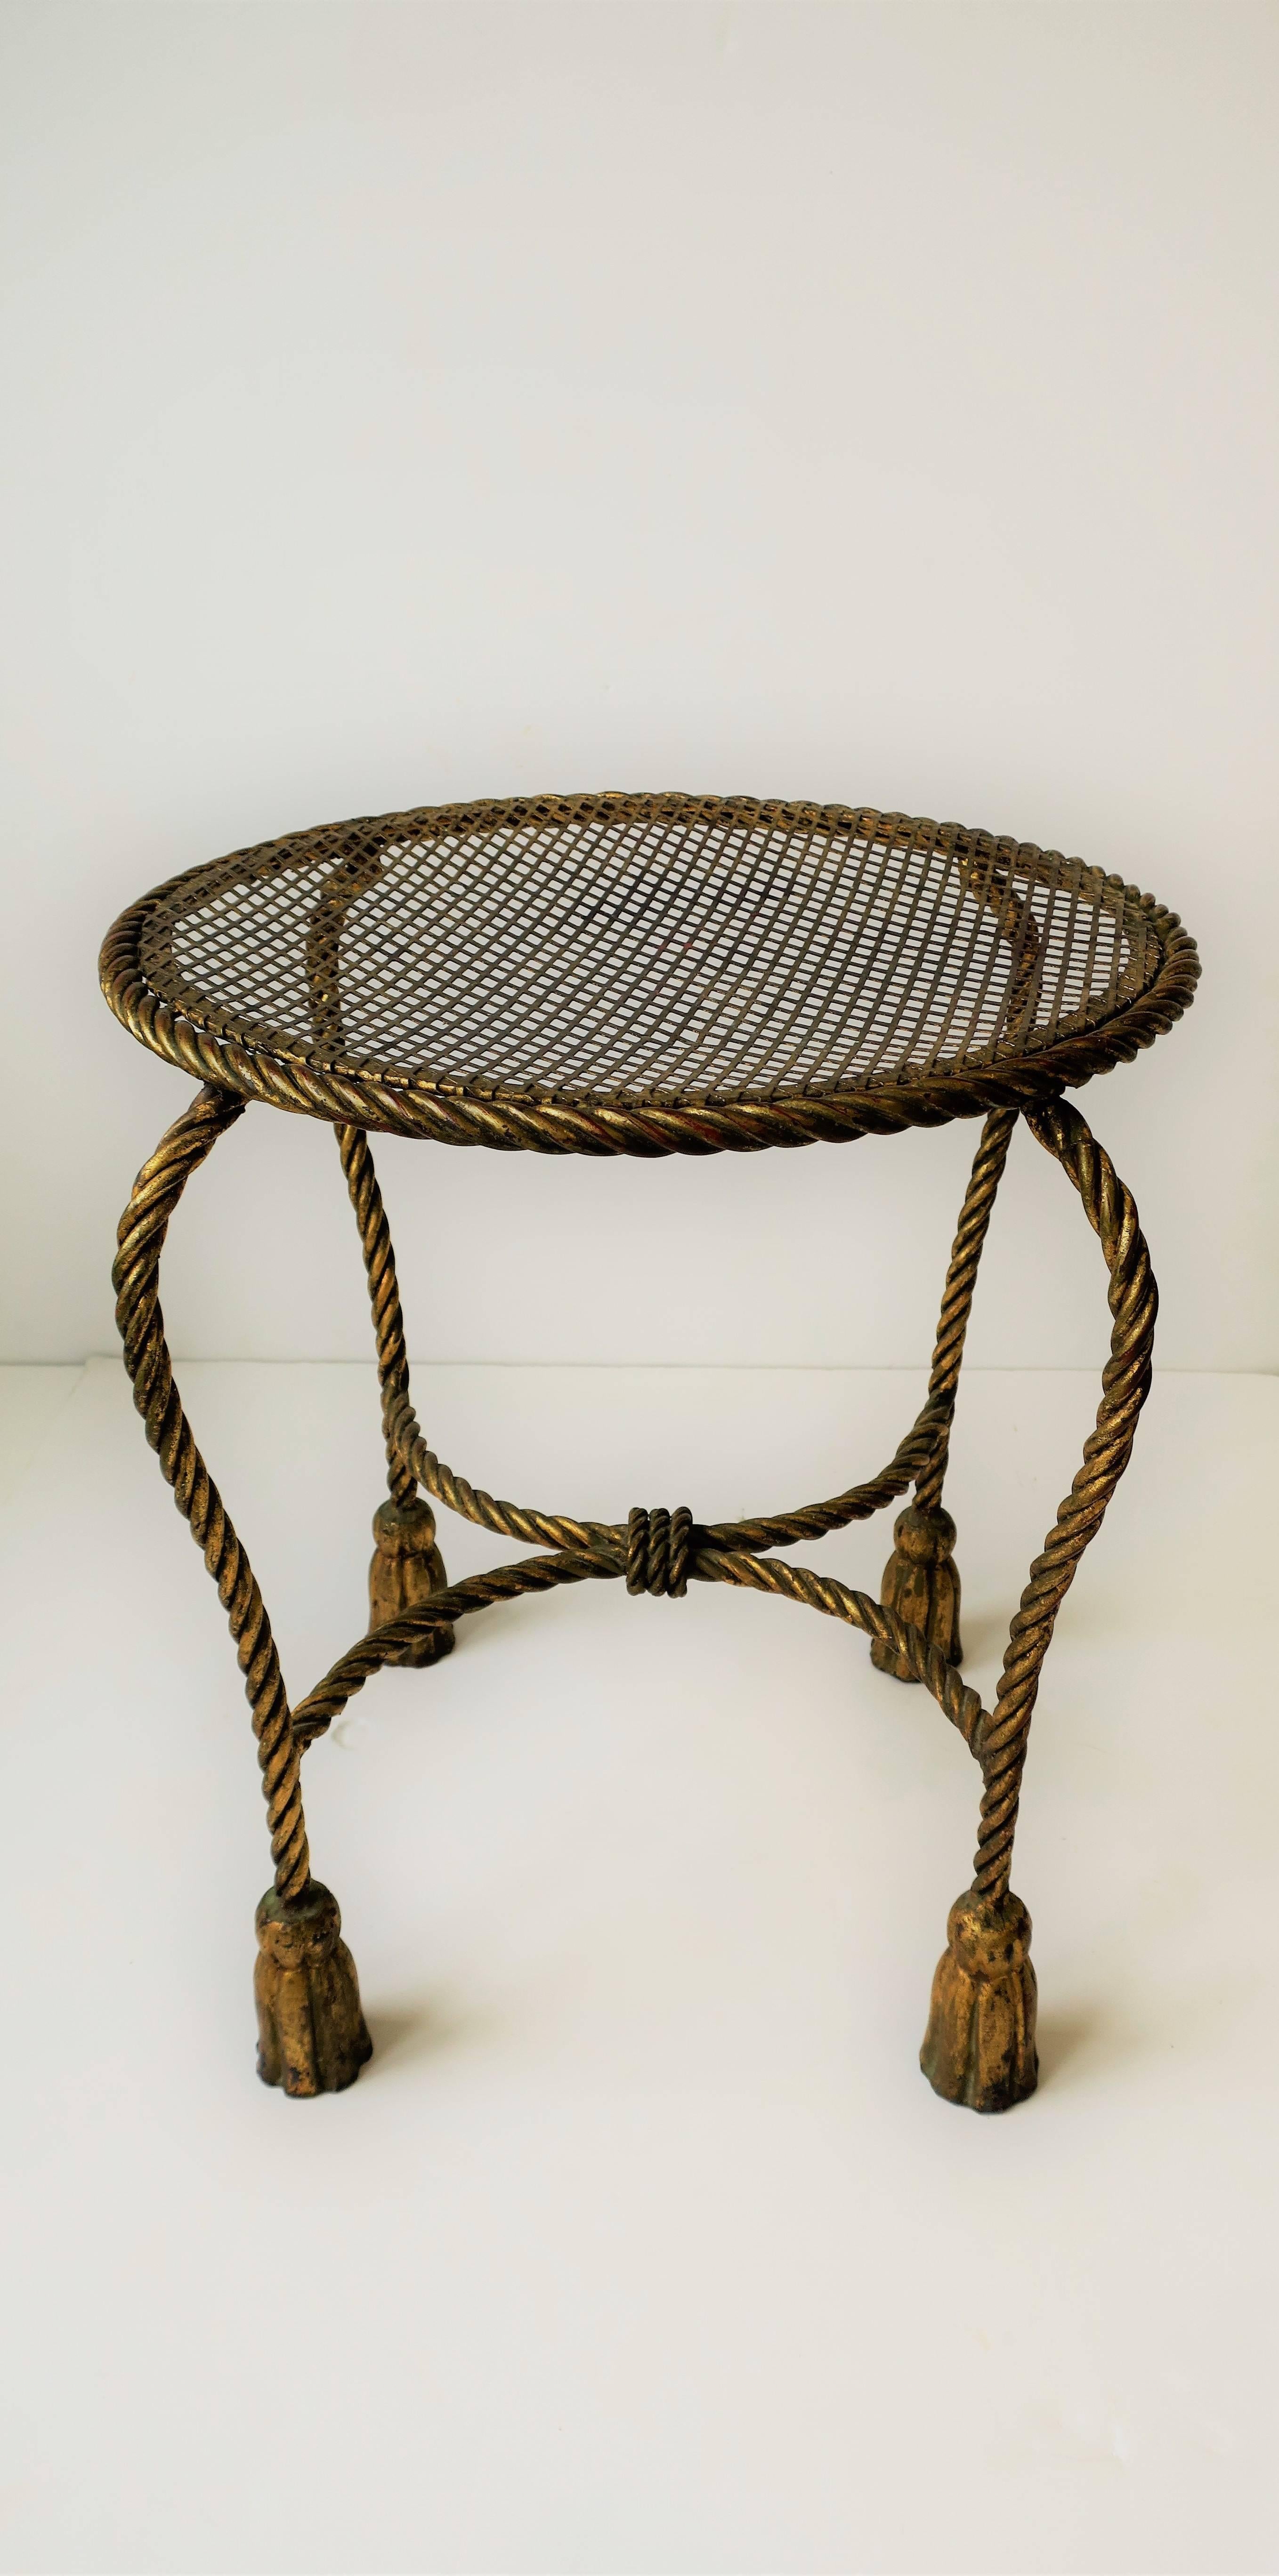 A mid-20th century Italian gold gilt metal stool or vanity seat/chair with a 'rope and tassel' design, decorative stretcher base. 

Piece measures: 17 in. H x 15.75 in. diameter. 

Item available here online. By request, item can be made available